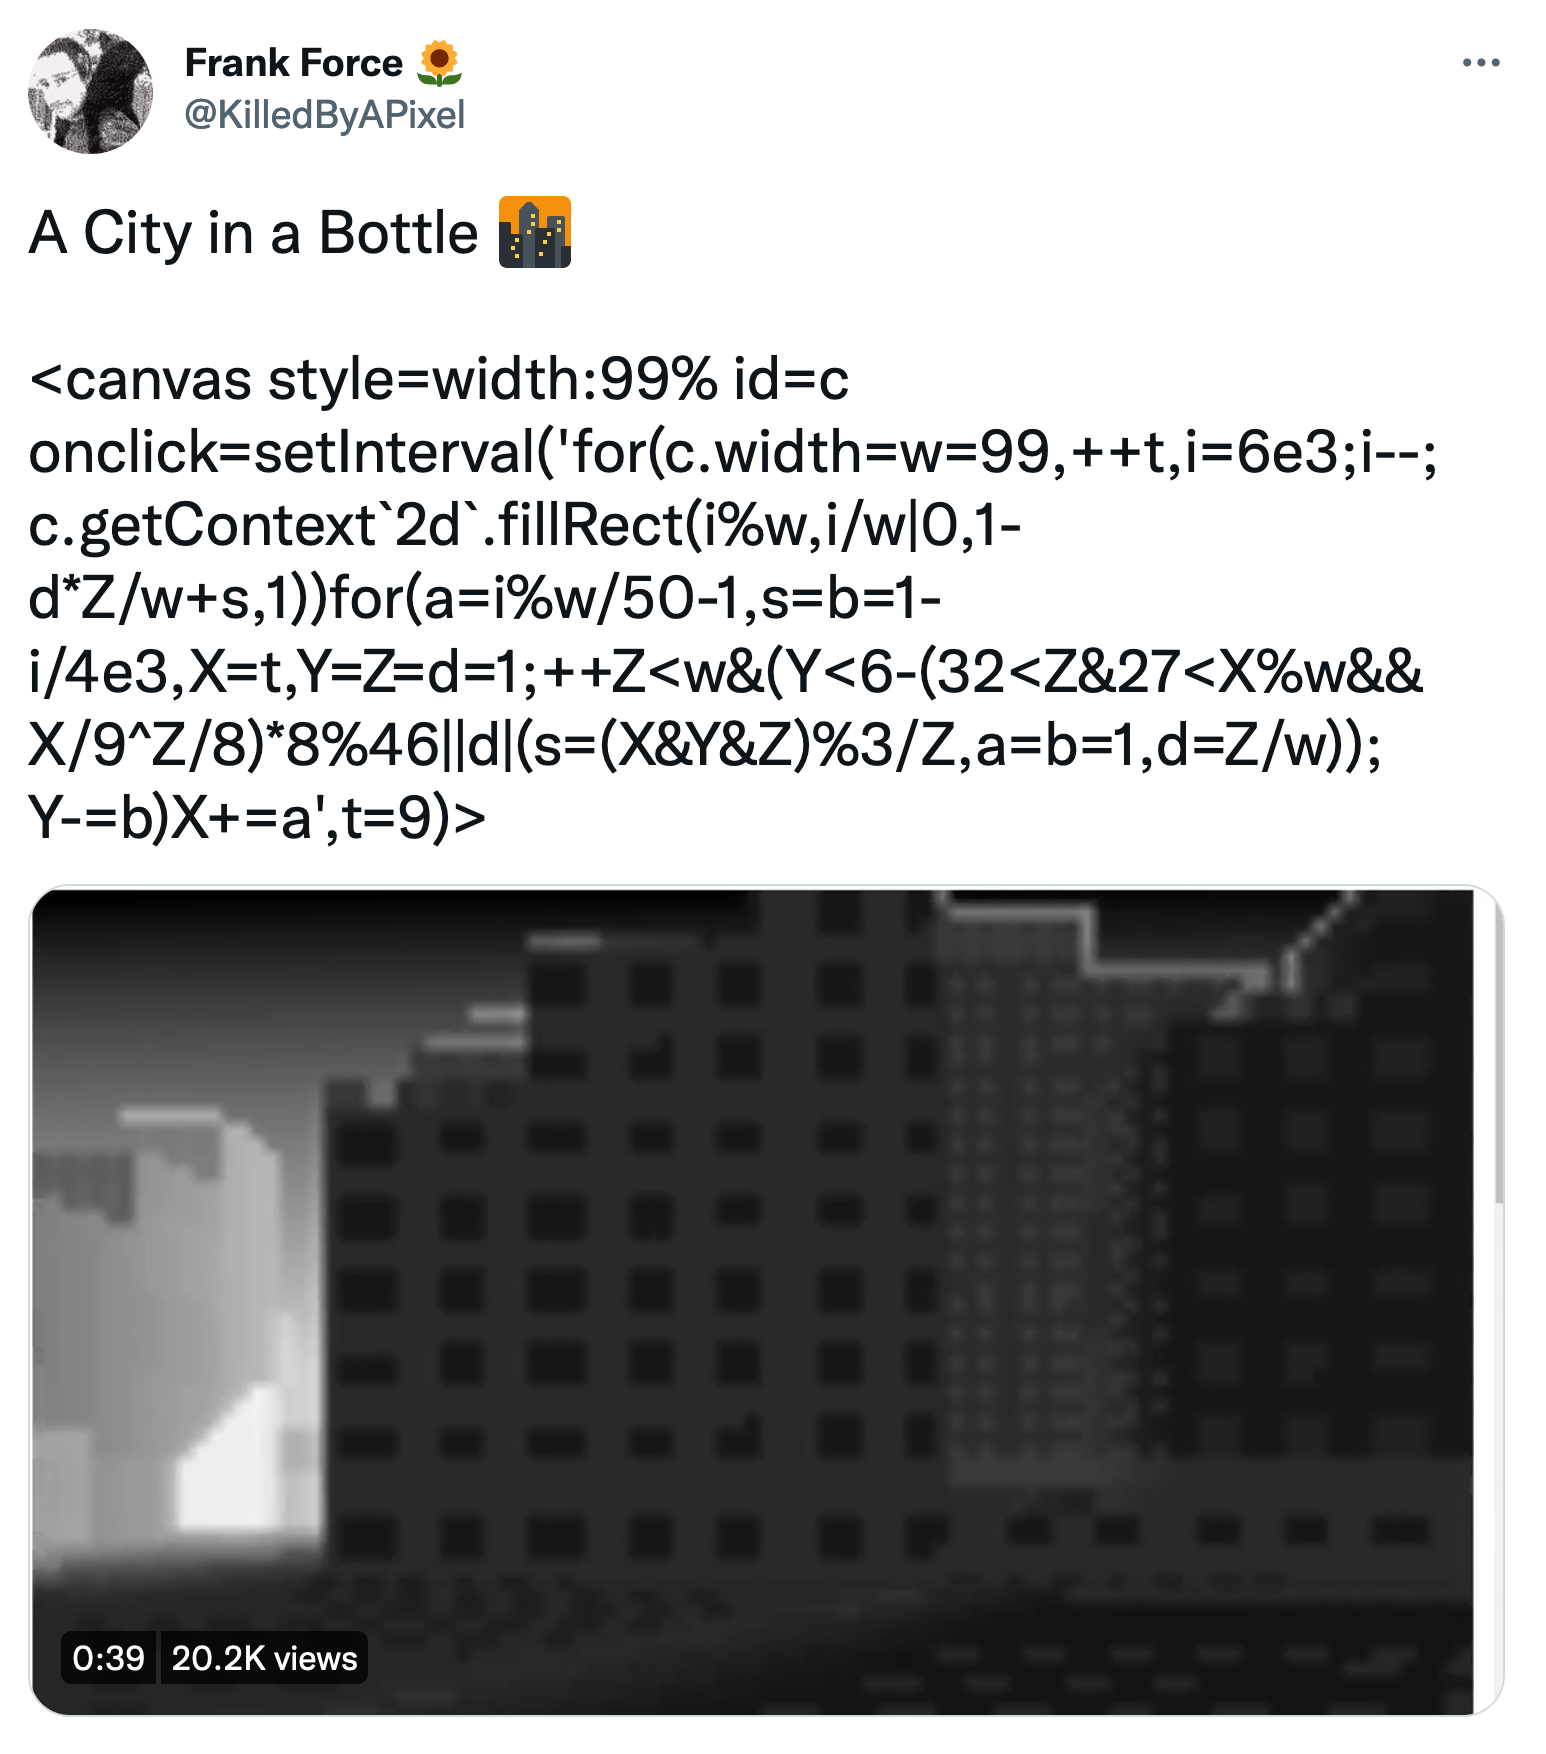 Tweet: "A city in a bottle" followed by source code which renders a city